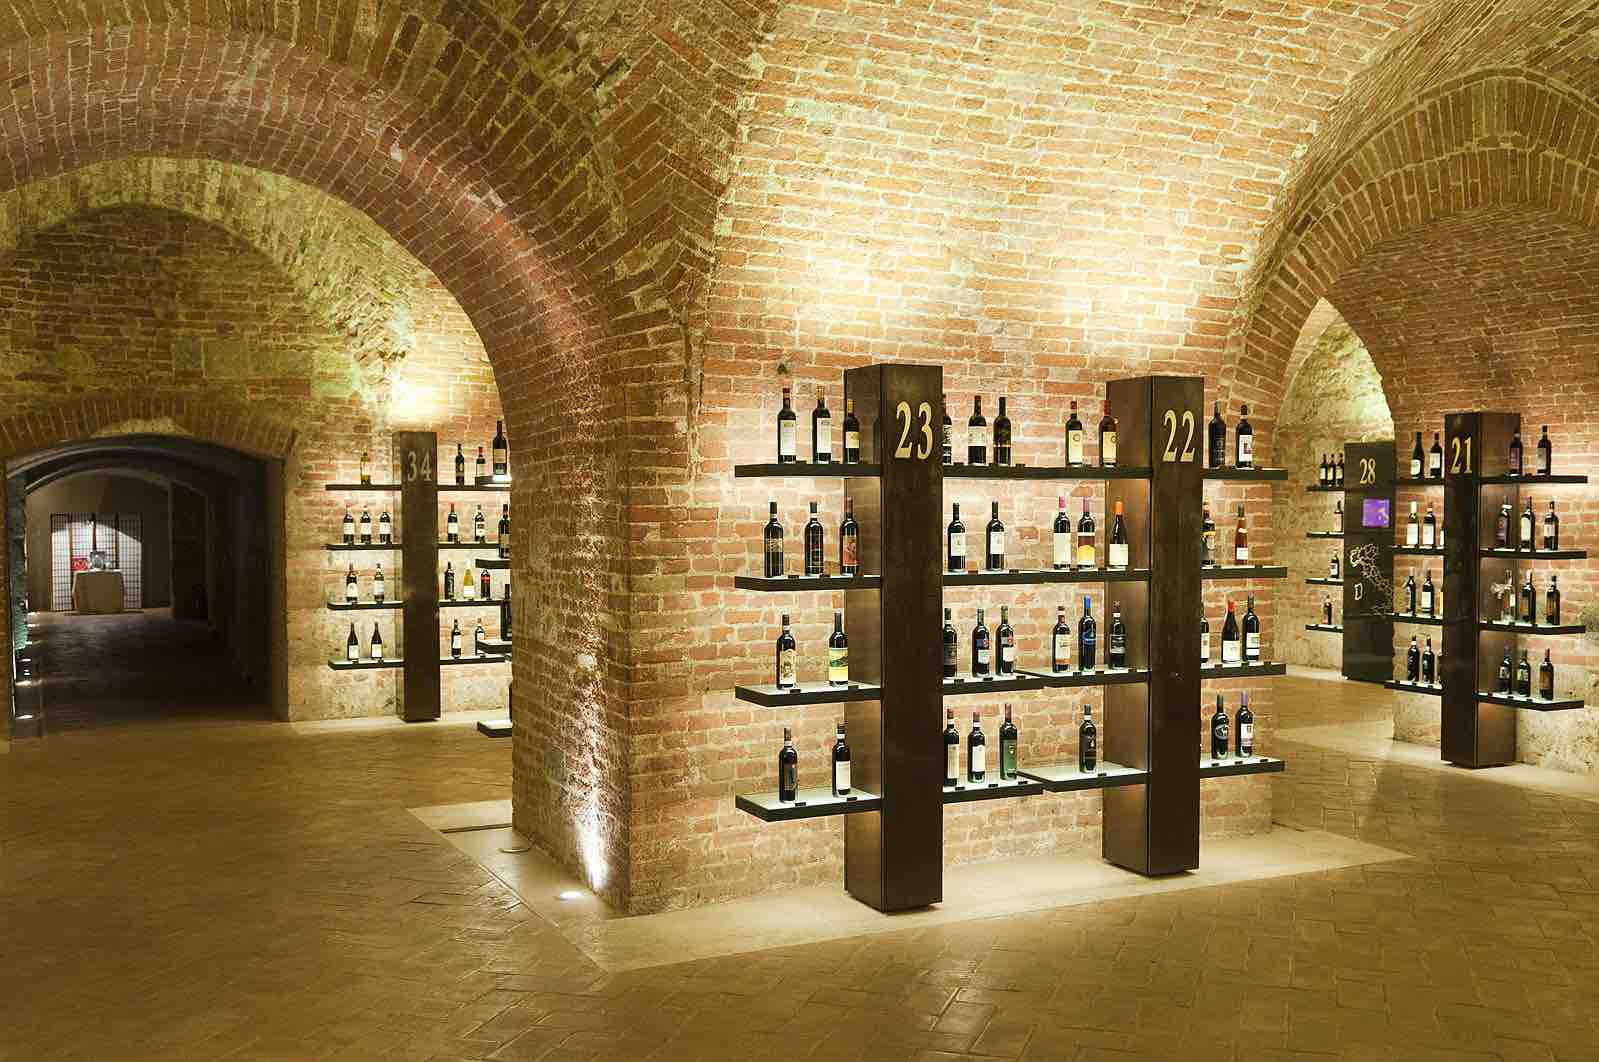 Top things to do in Tuscany include visiting Enoteca Italiana to sample their wines in these cellars